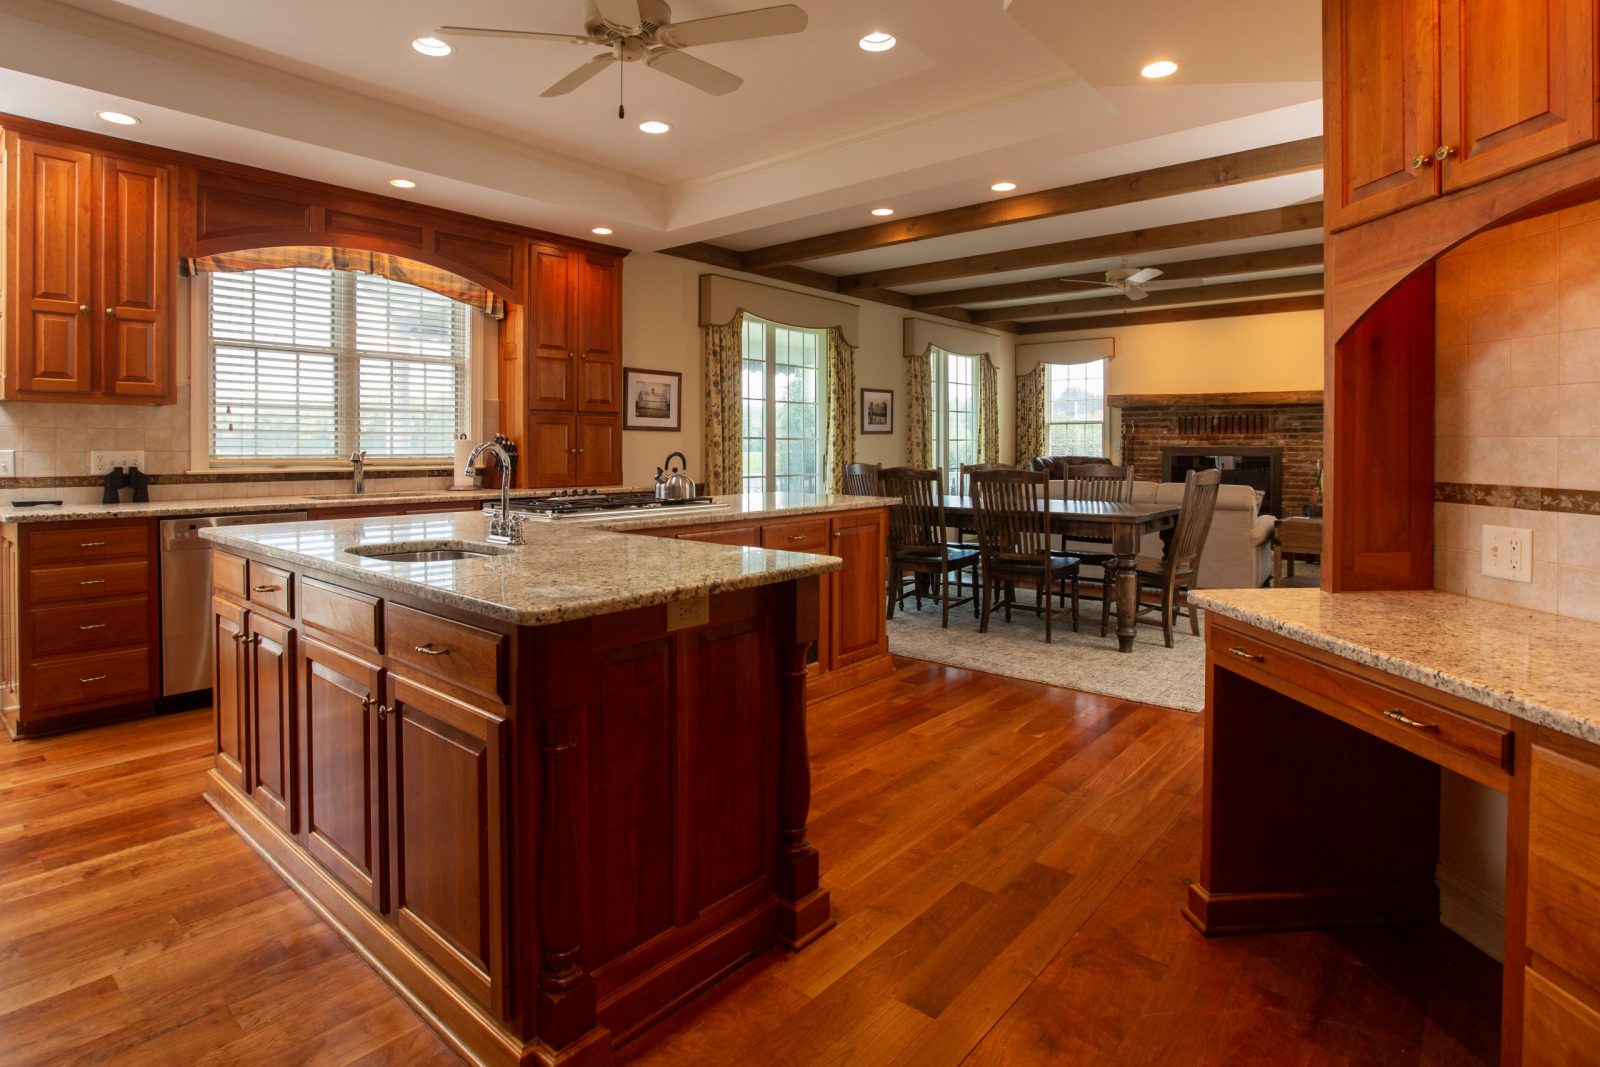 kitchen cabinets and countertops, wide view